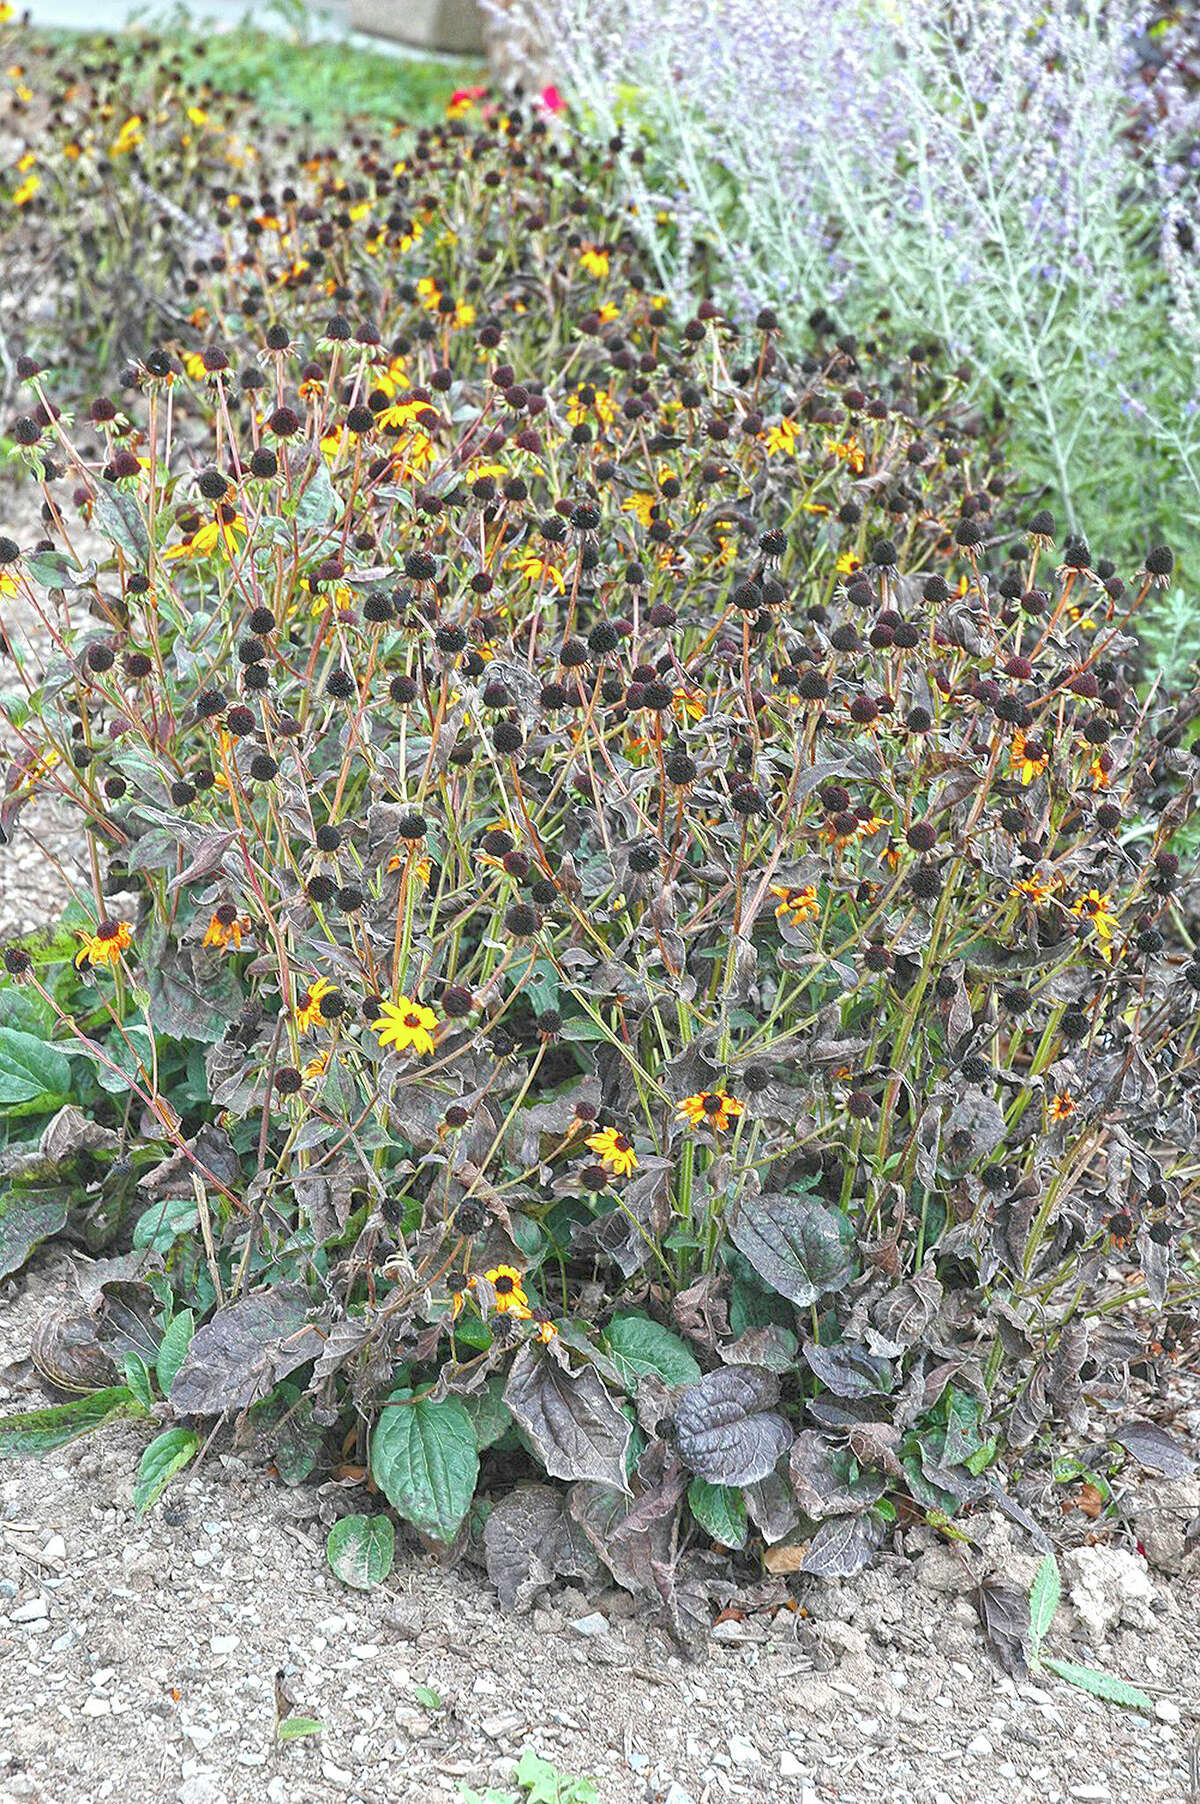 The seed heads of rudbeckia attract seed-eating songbirds to the winter garden.